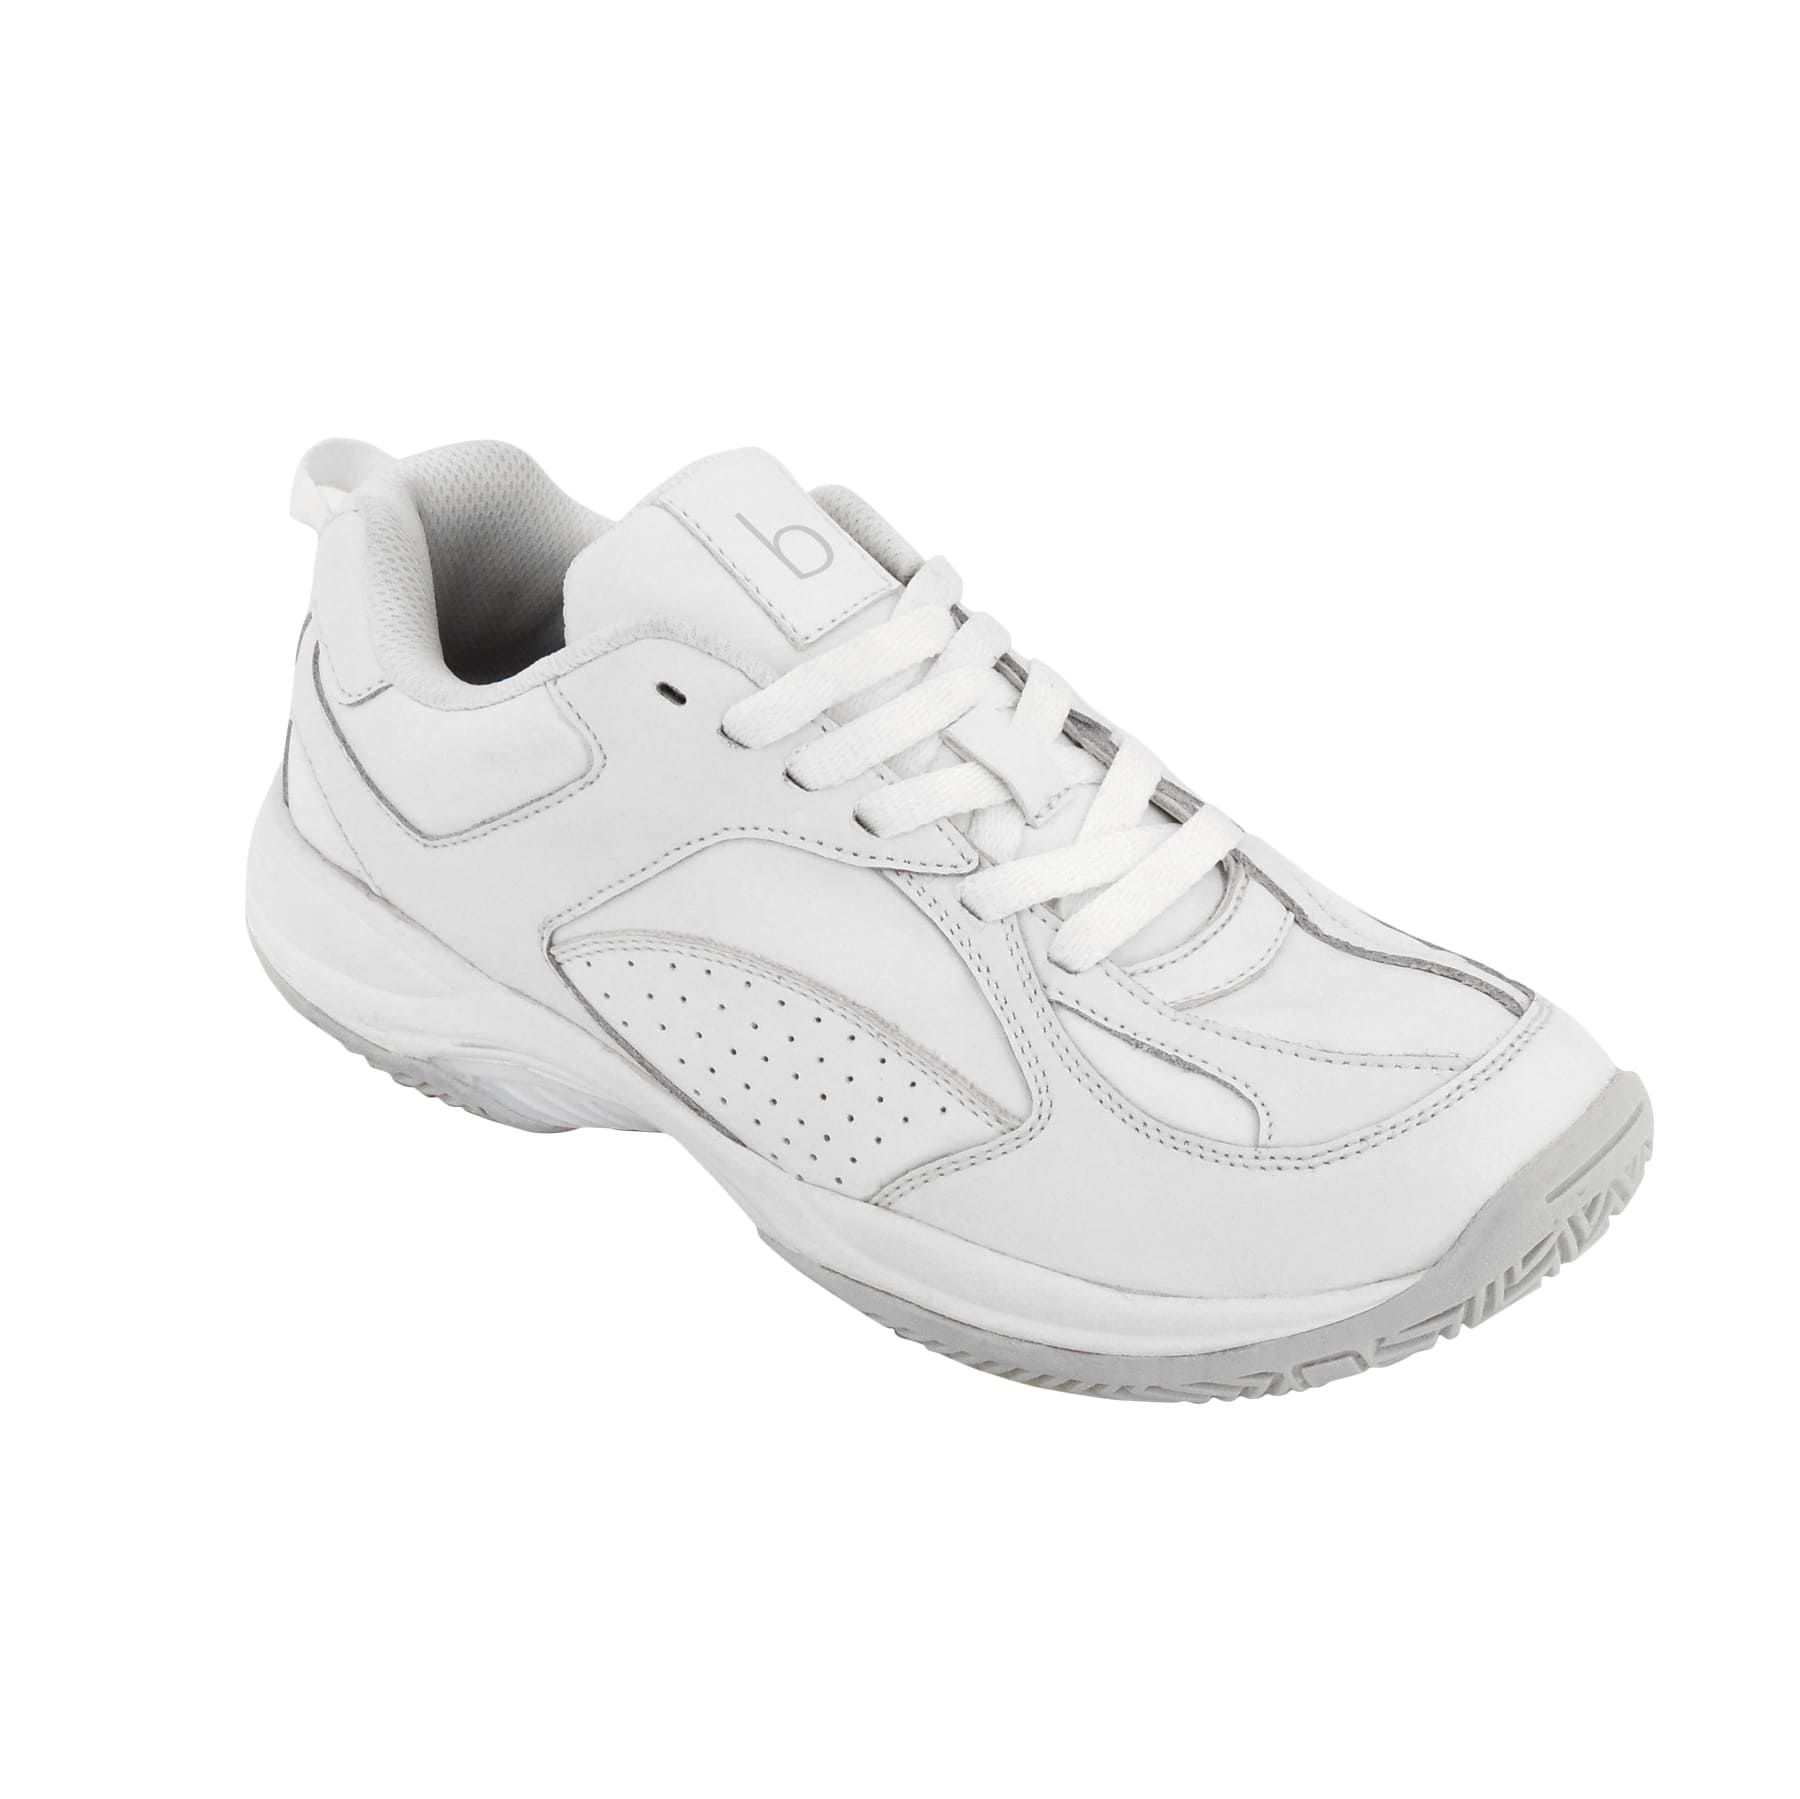 Biotime Women's Ferra Shoes with removable anti-bacterial insole